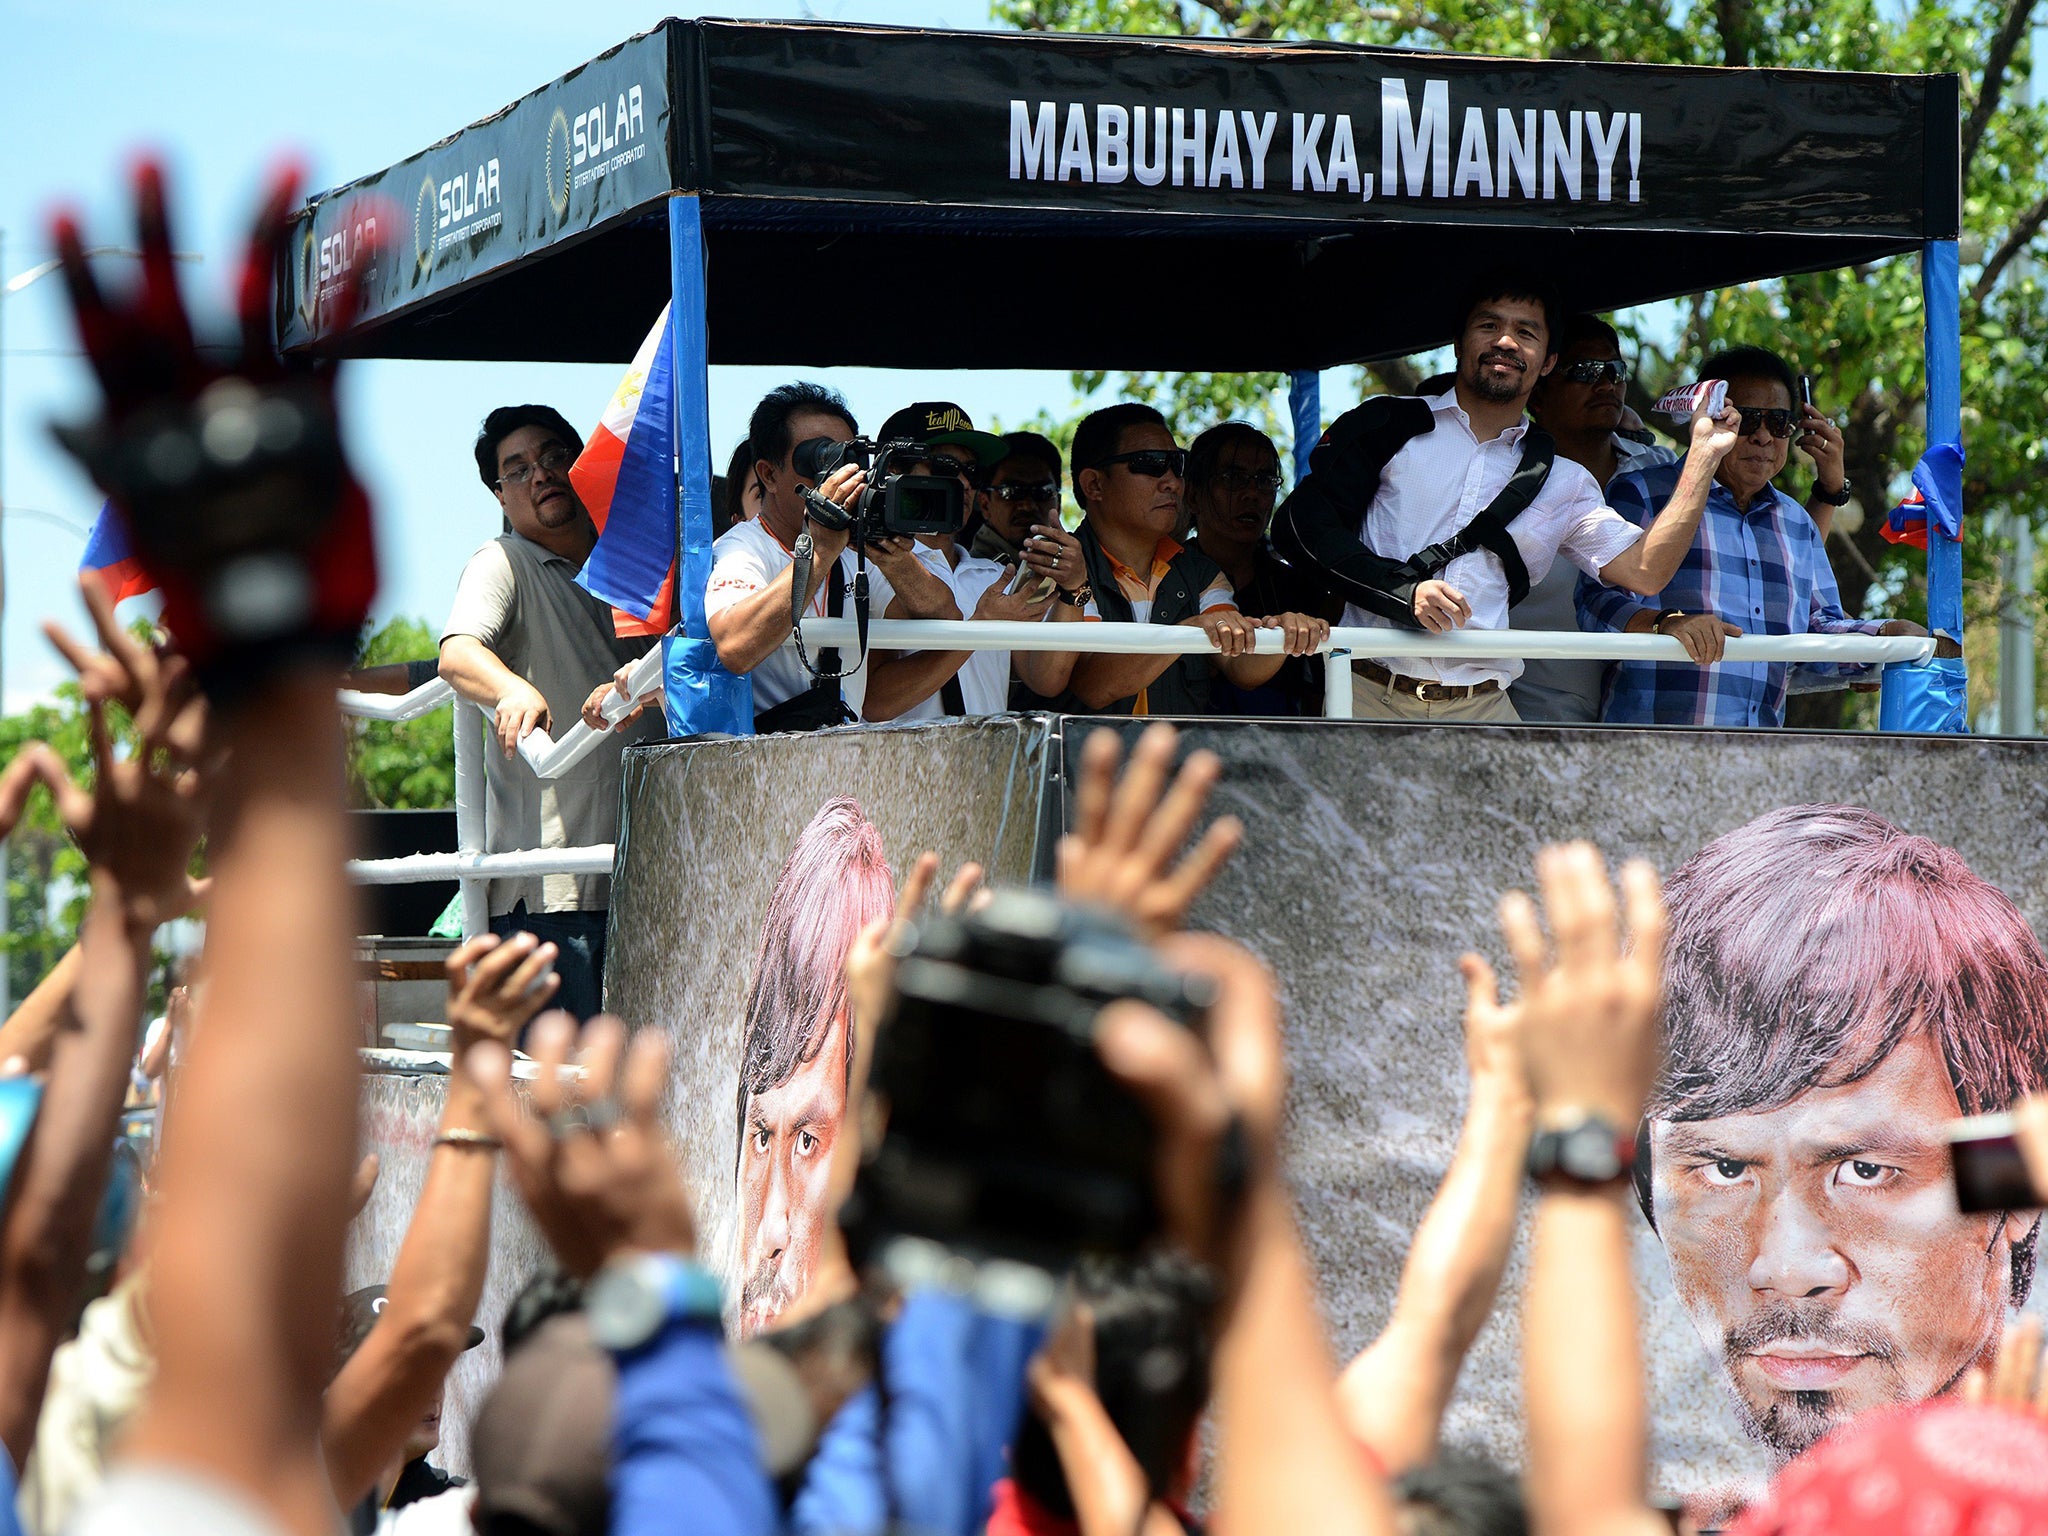 Manny Pacquiao on his return to the Philippines